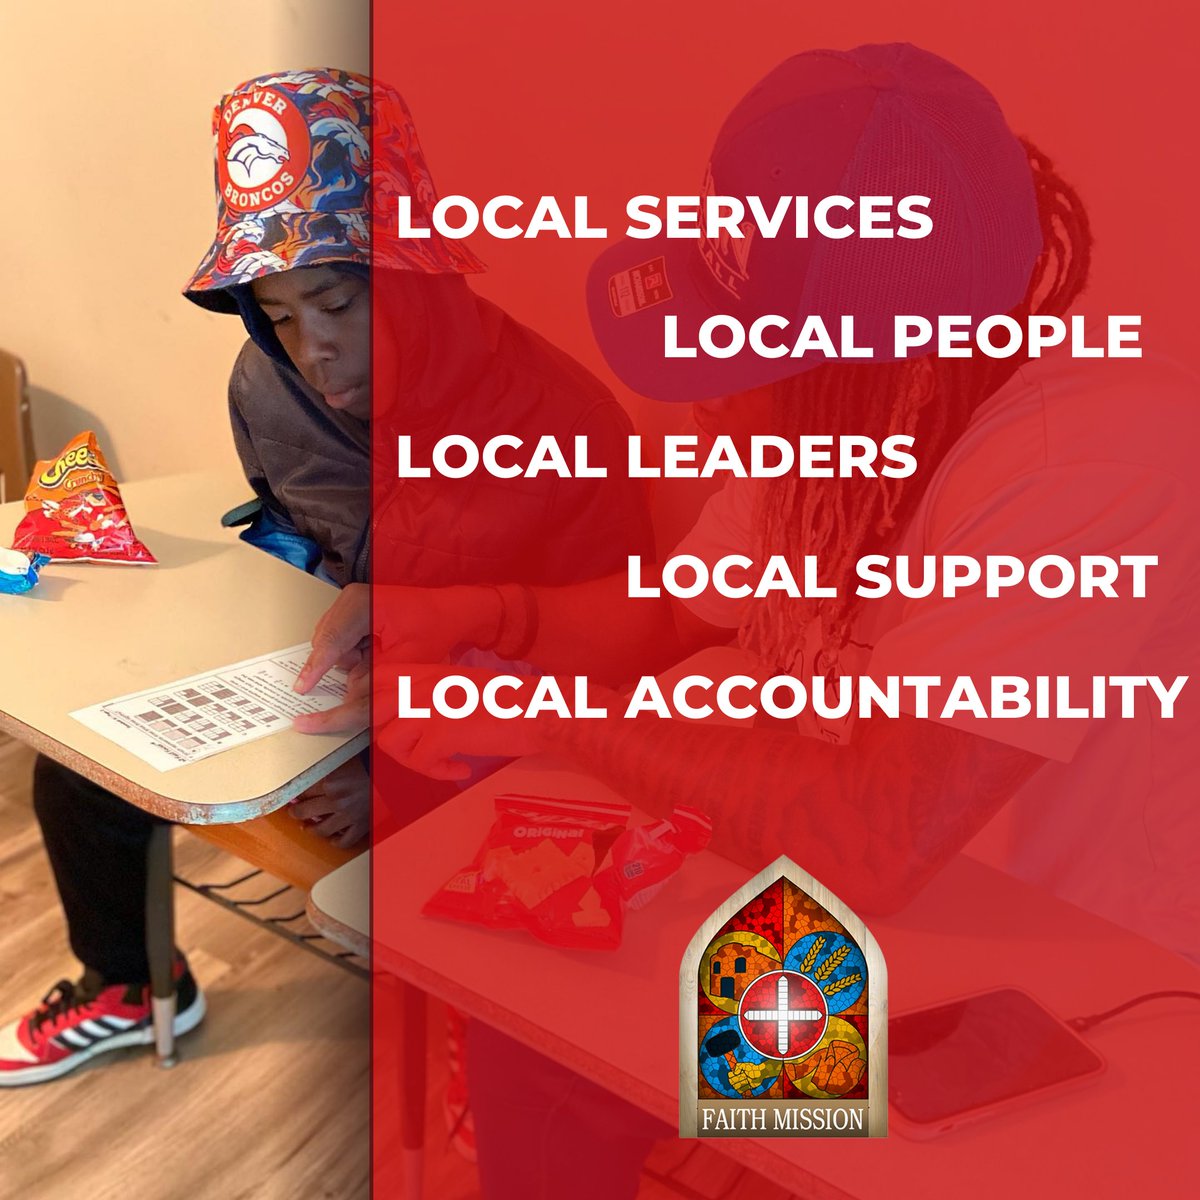 We are dedicated to serving our community by providing essential services, fostering local leadership, and offering compassionate support to those in need. Help us continue our mission by donating to our Faith Mission Cannery Center Capital Campaign at faithmission.us/#donate.